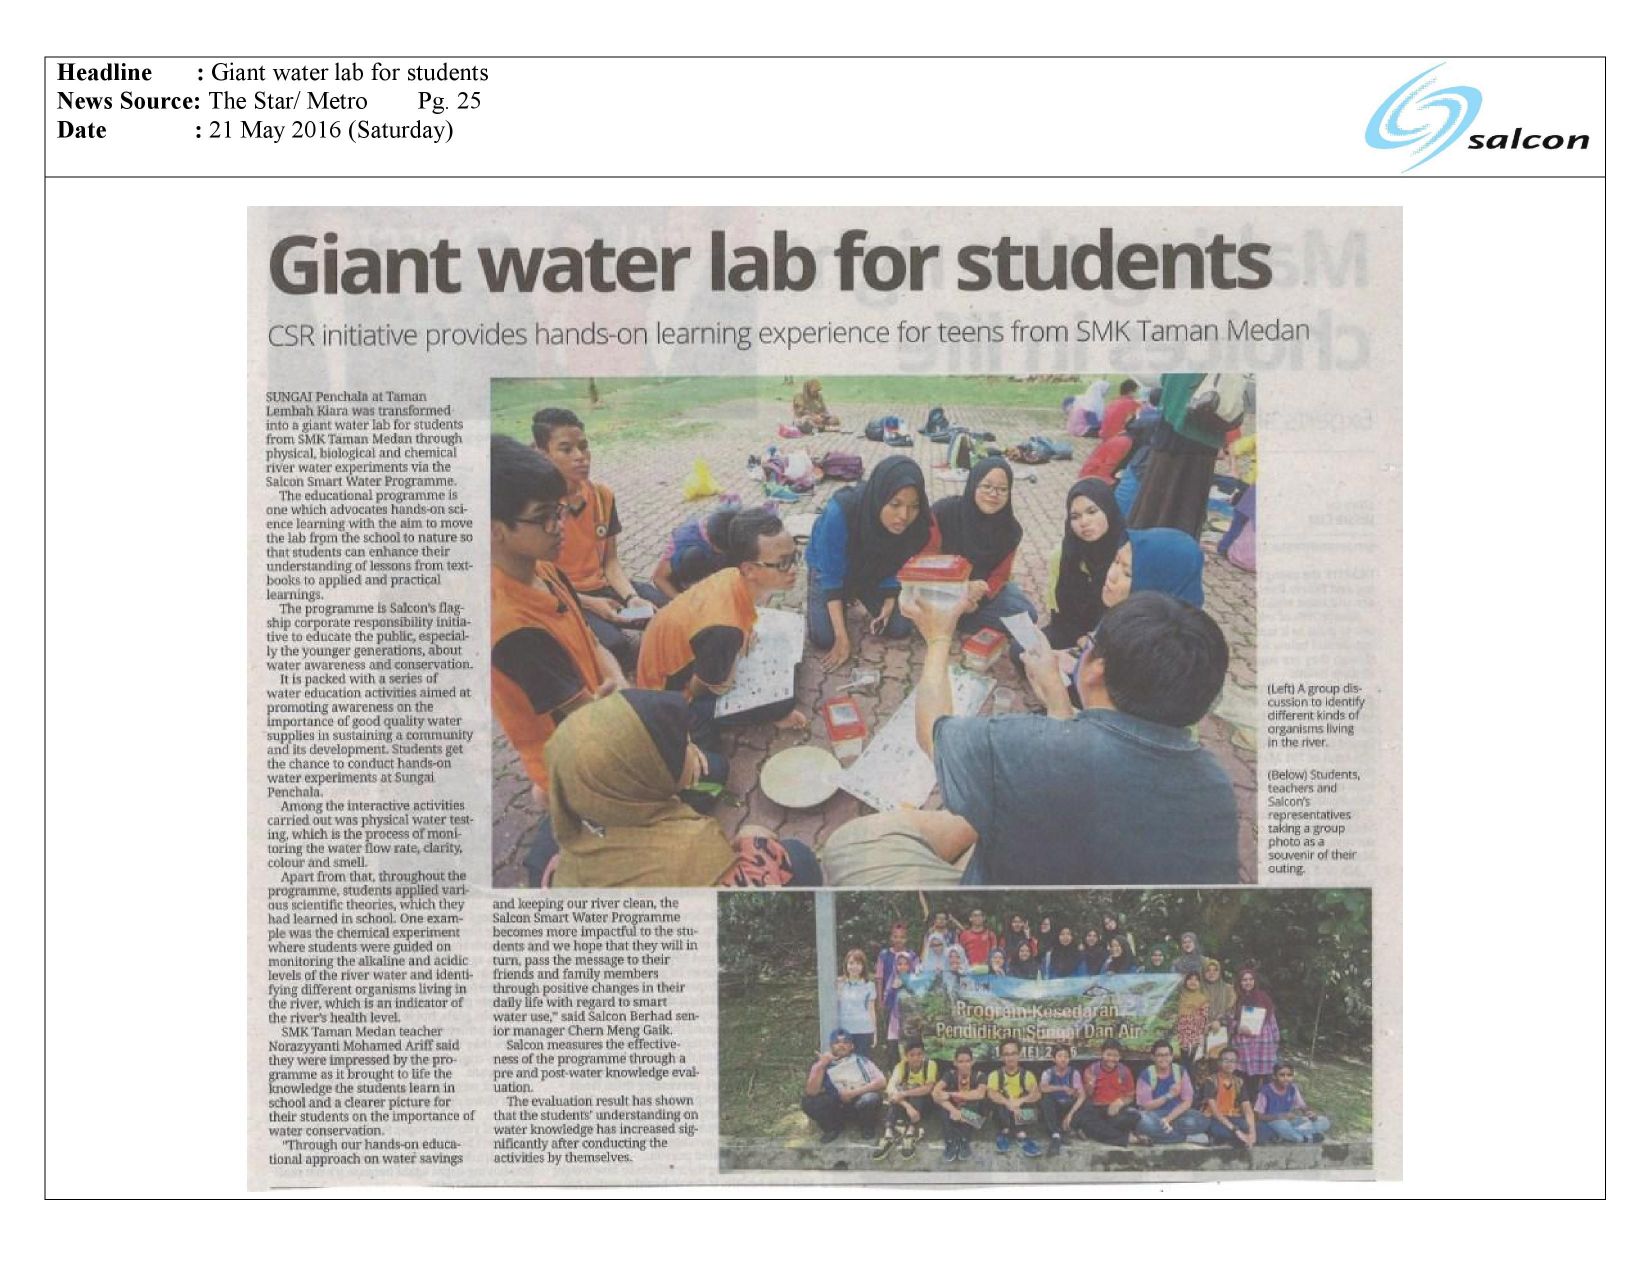 Giant water lab for students